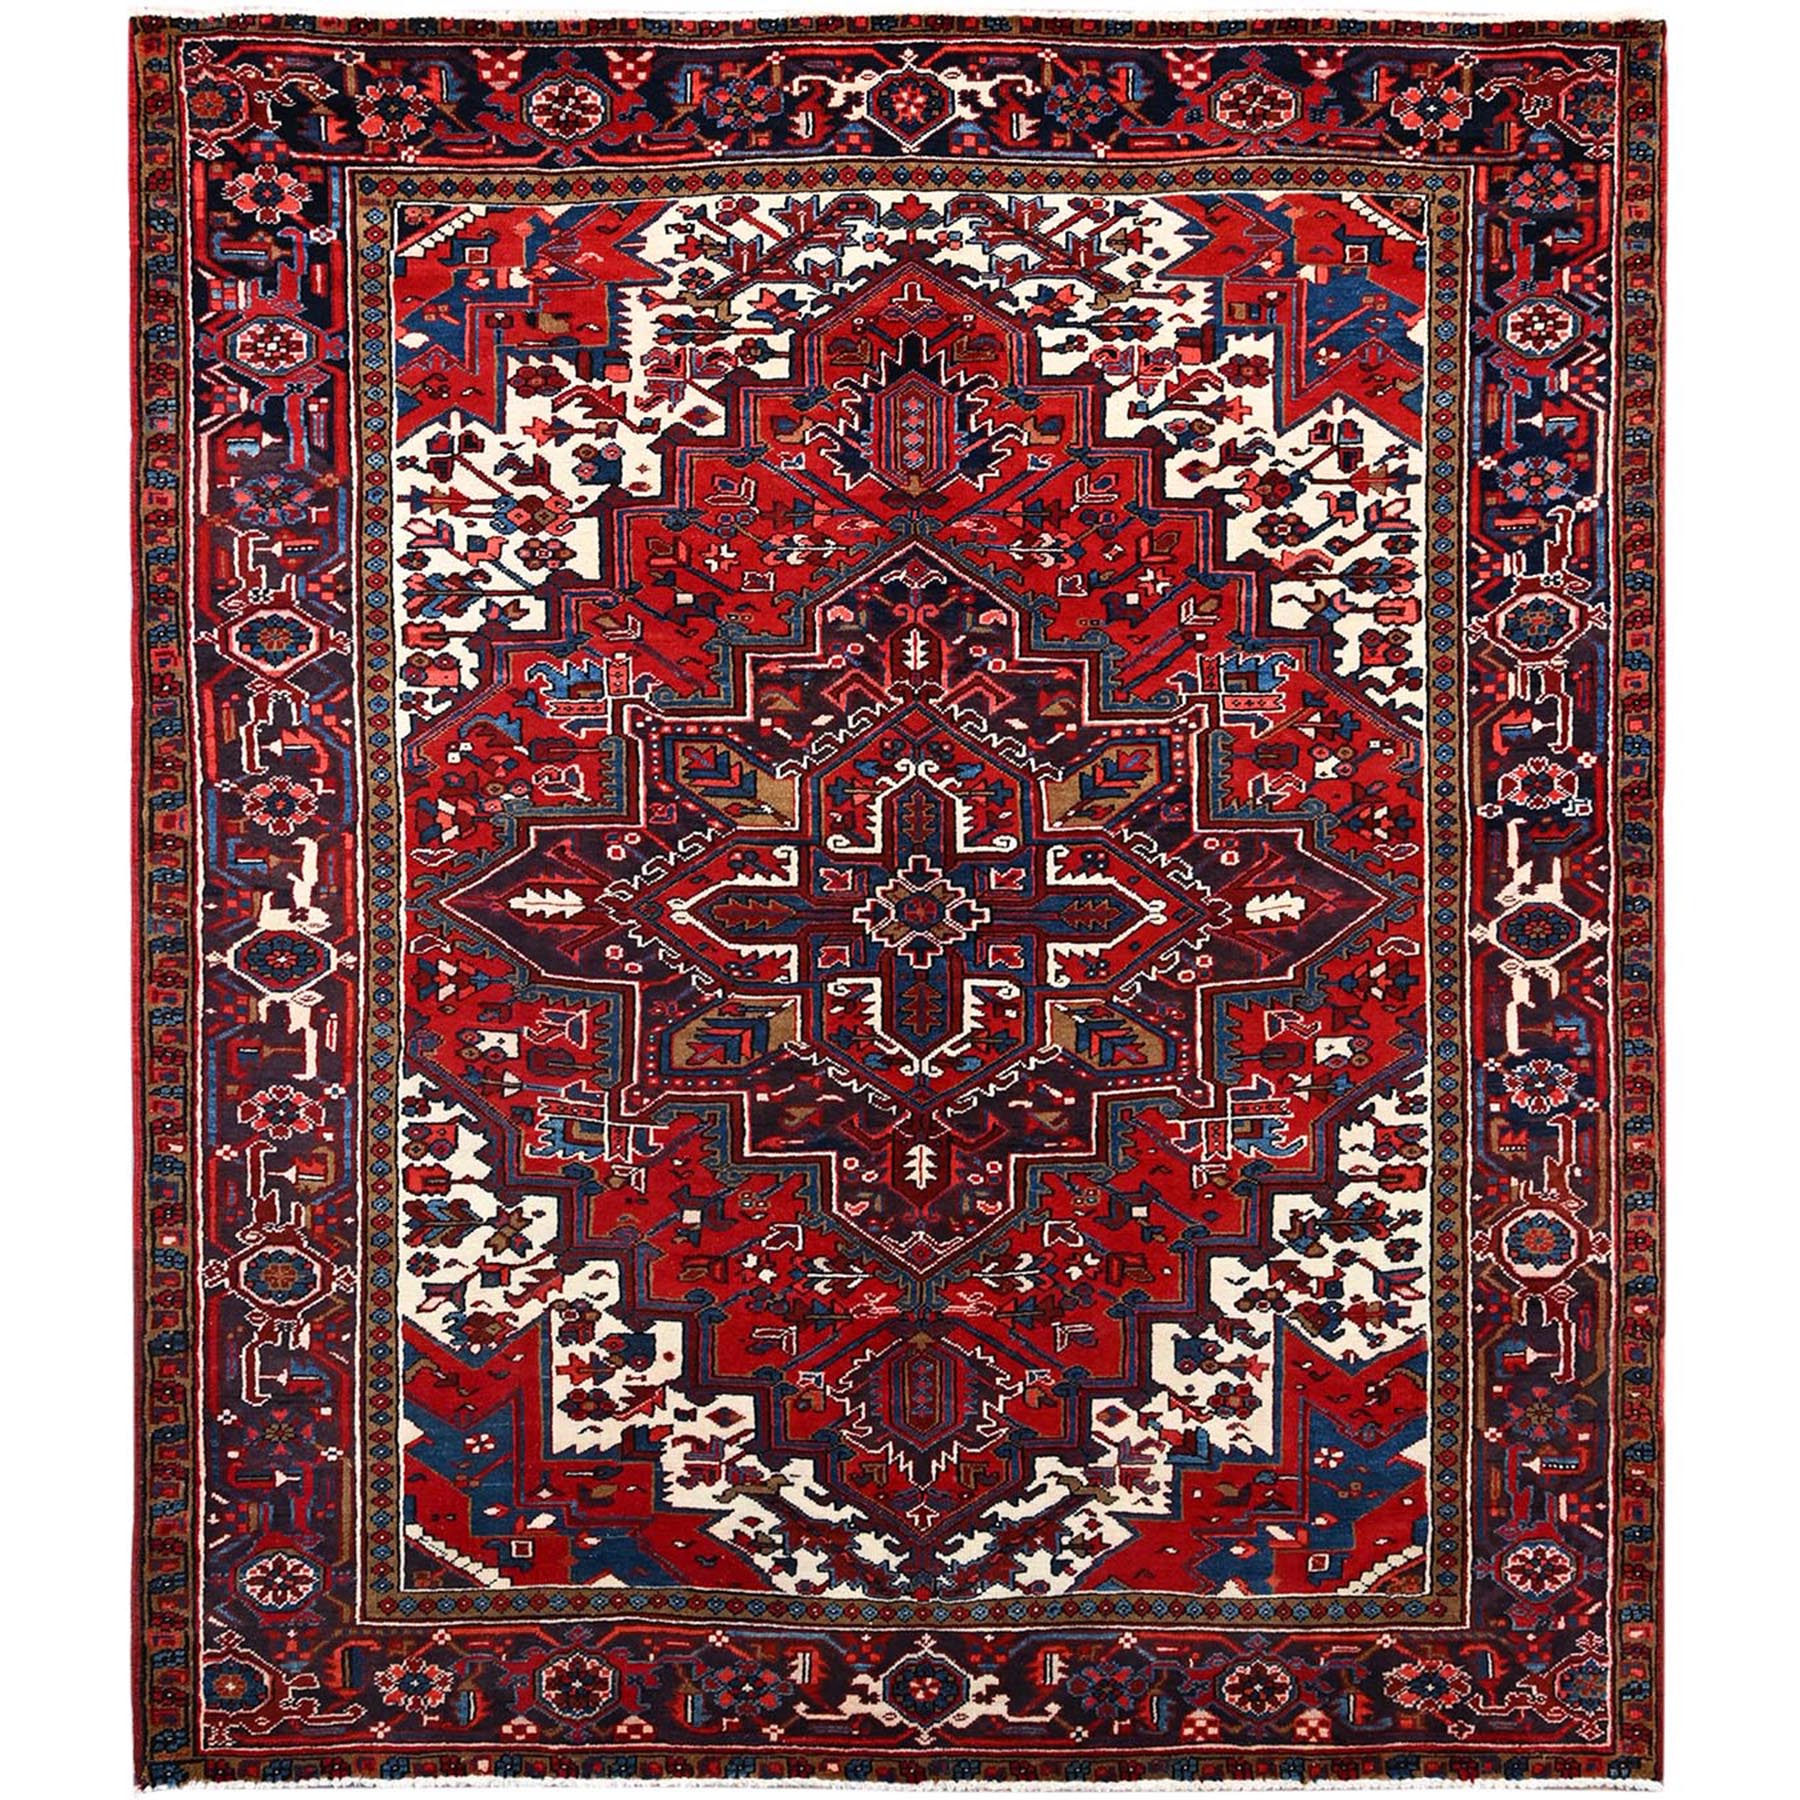  Wool Hand-Knotted Area Rug 6'11